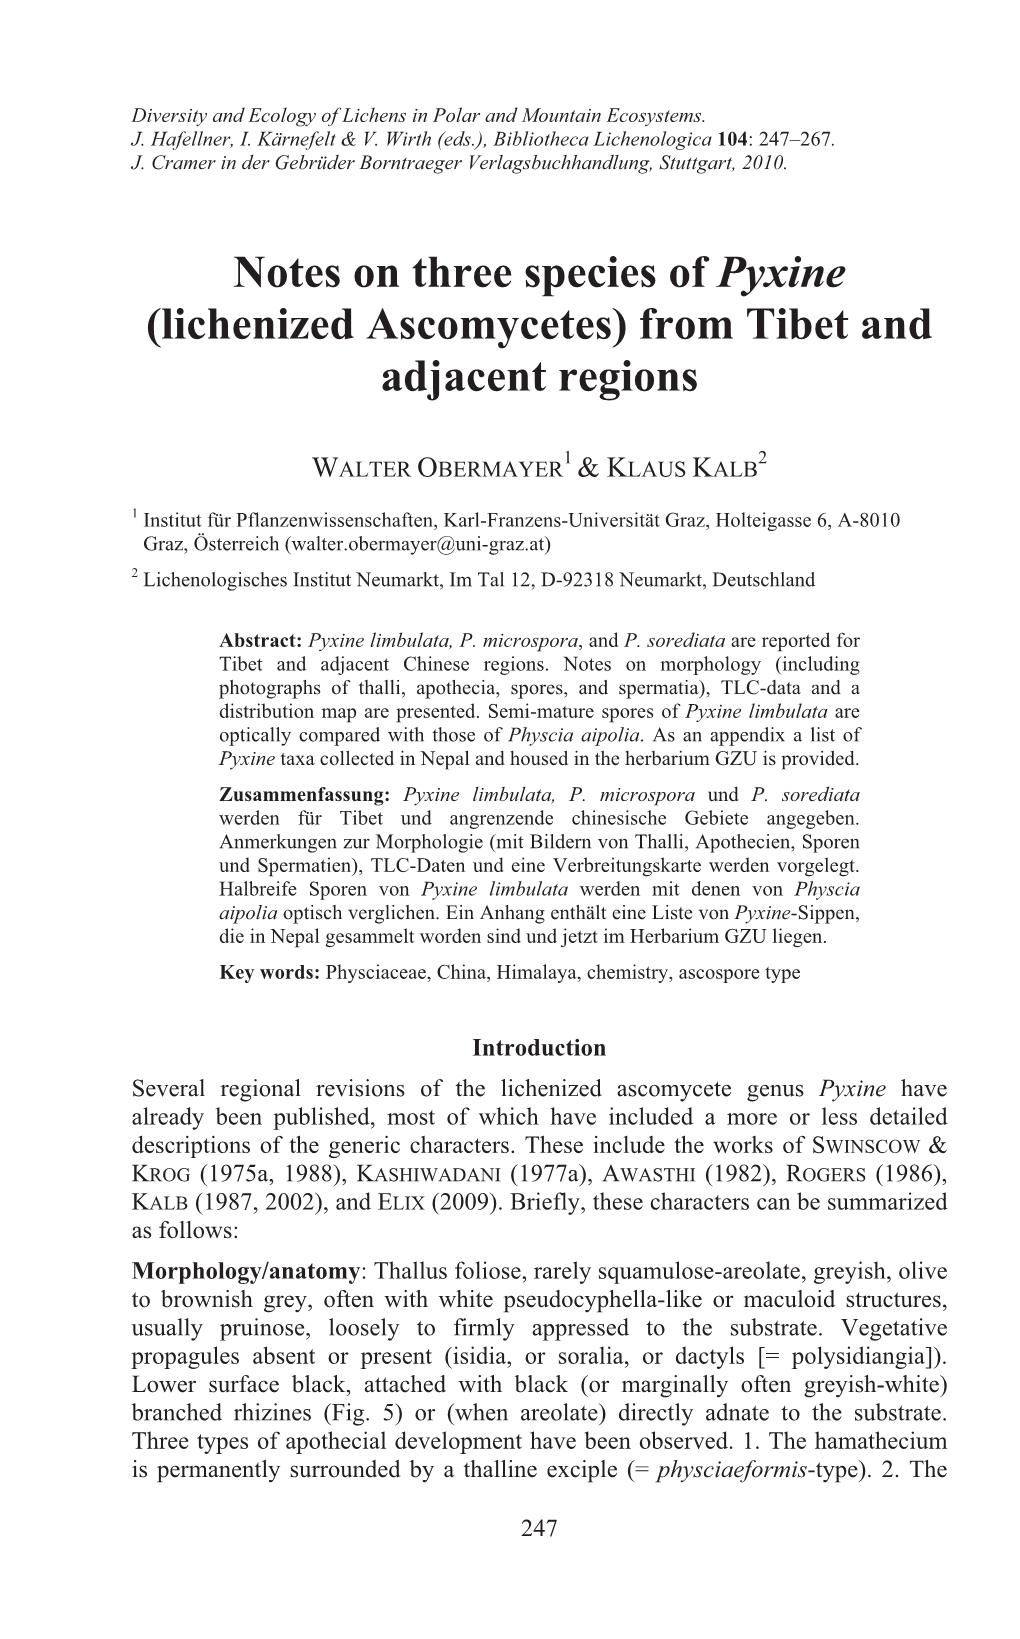 Notes on Three Species of Pyxine (Lichenized Ascomycetes) from Tibet and Adjacent Regions